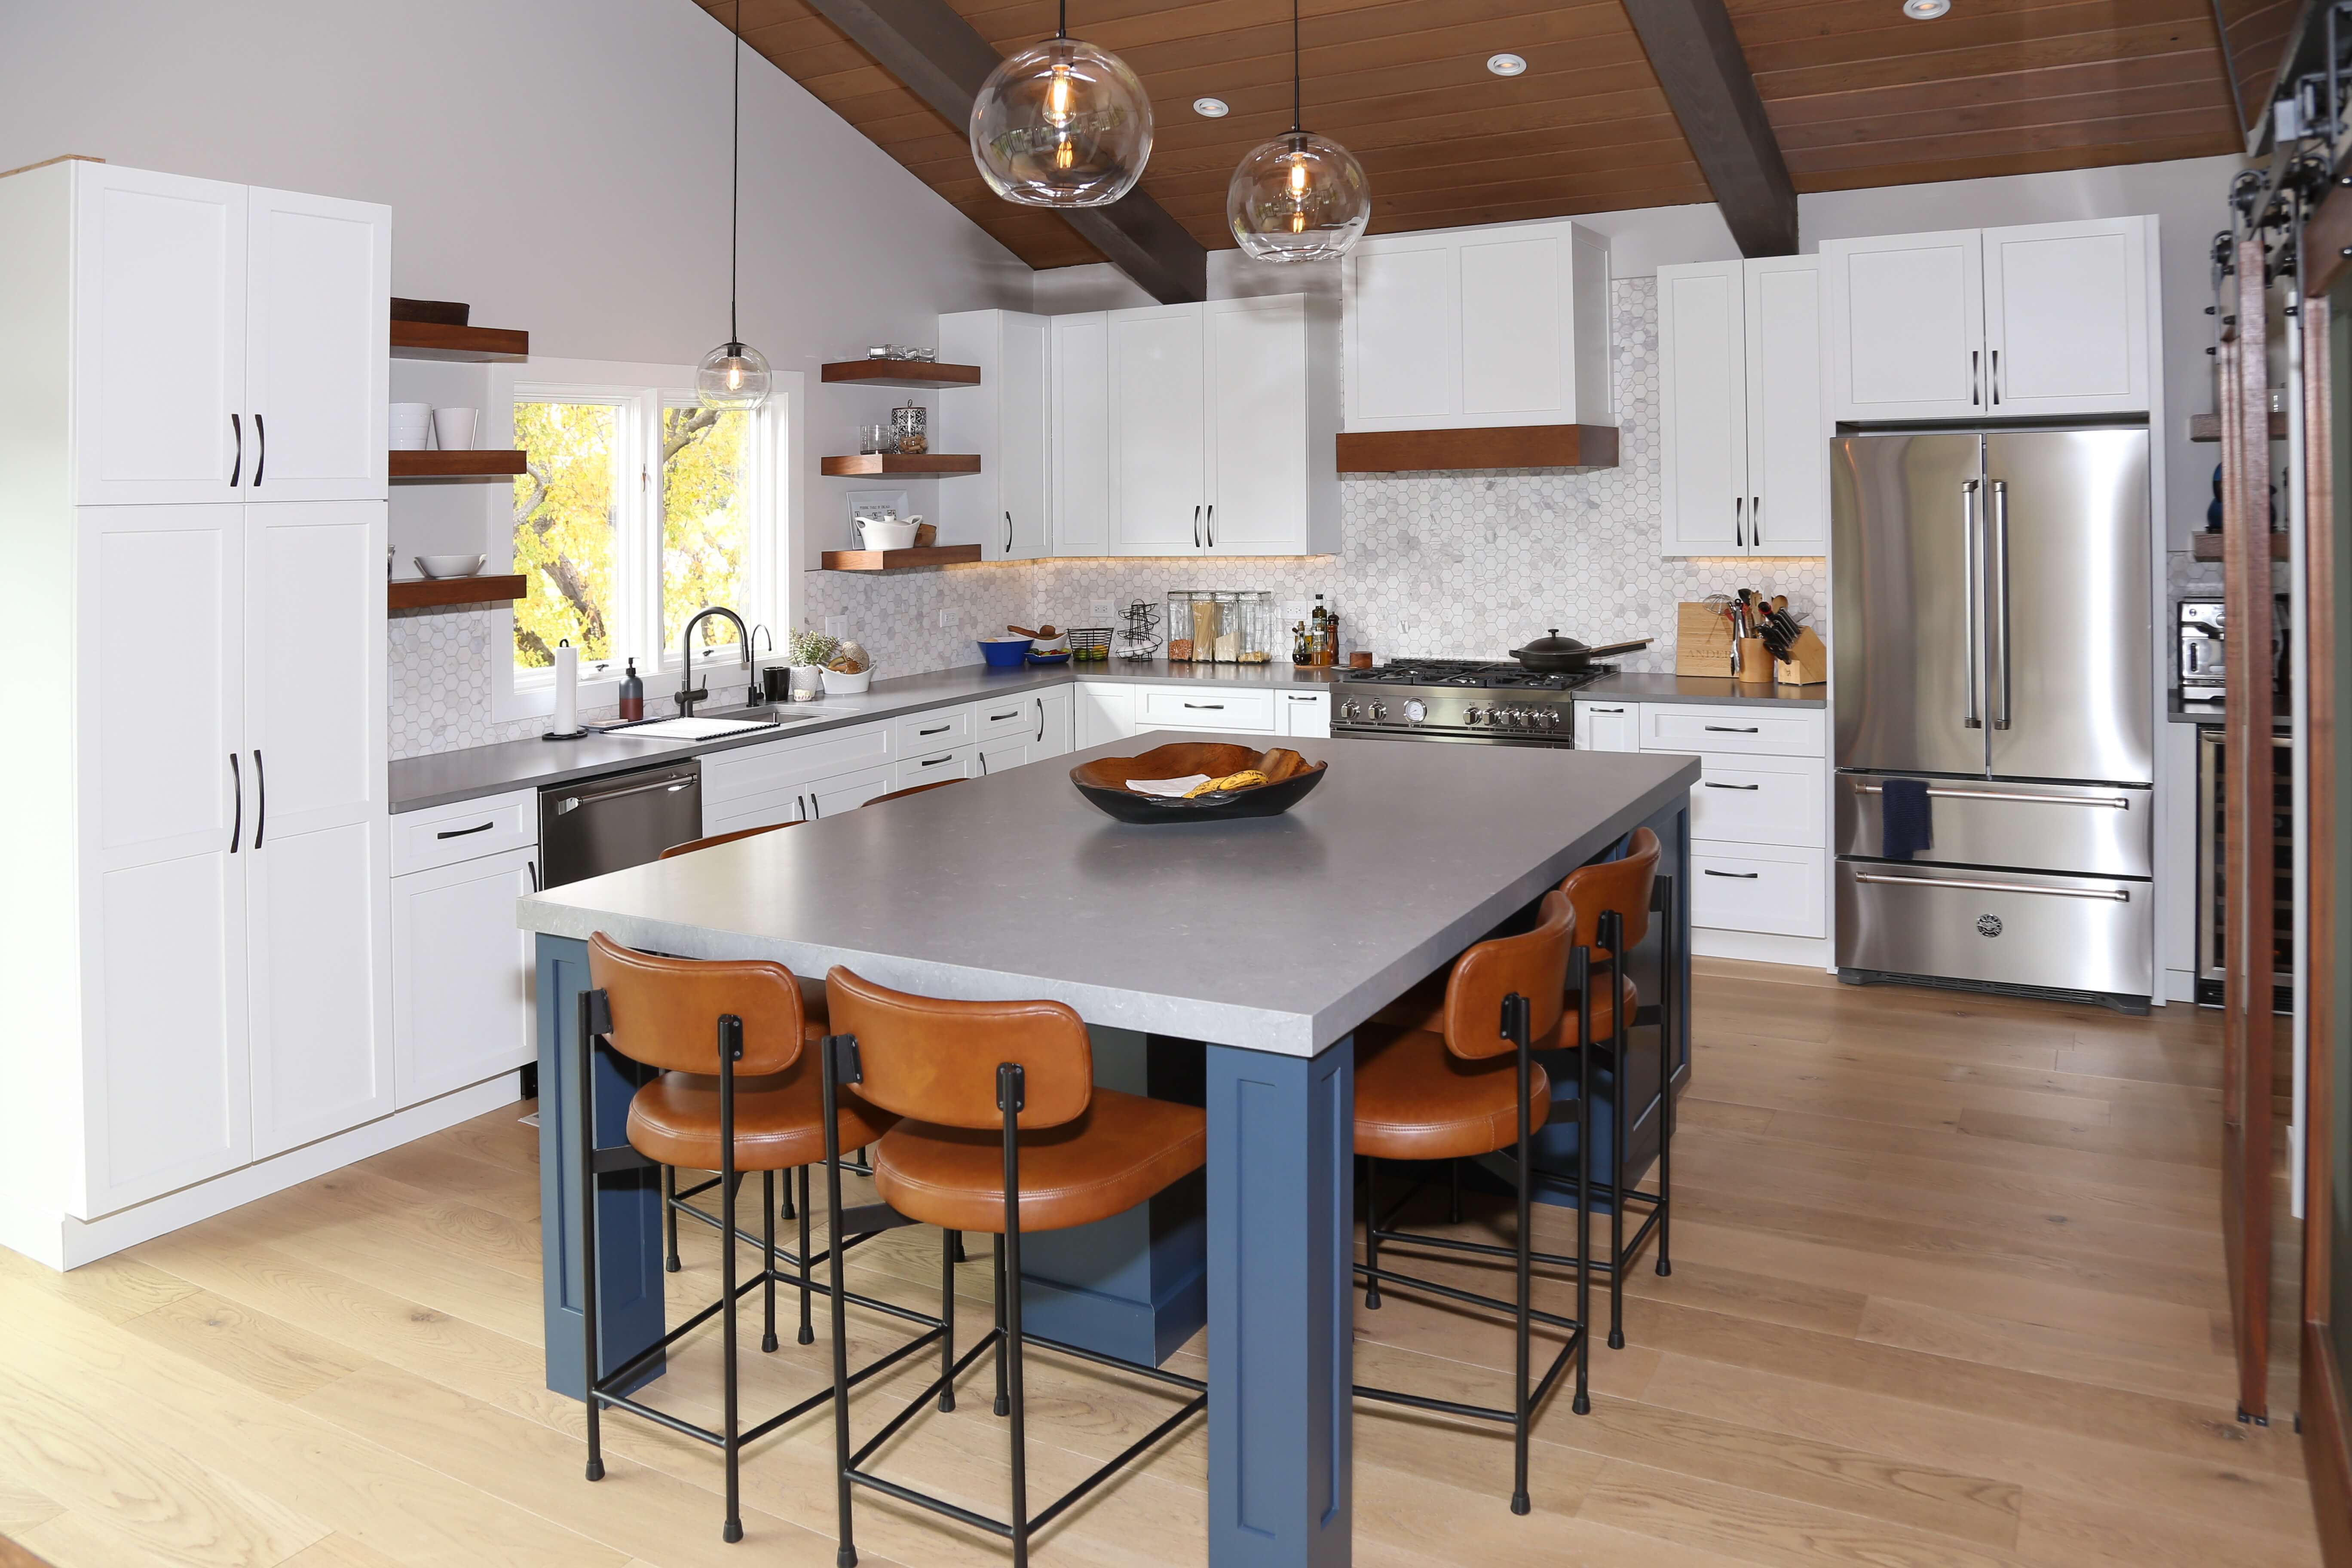 A modern farmhouse kitchen with a navy blue painted kitchen island with countertop seating for six.